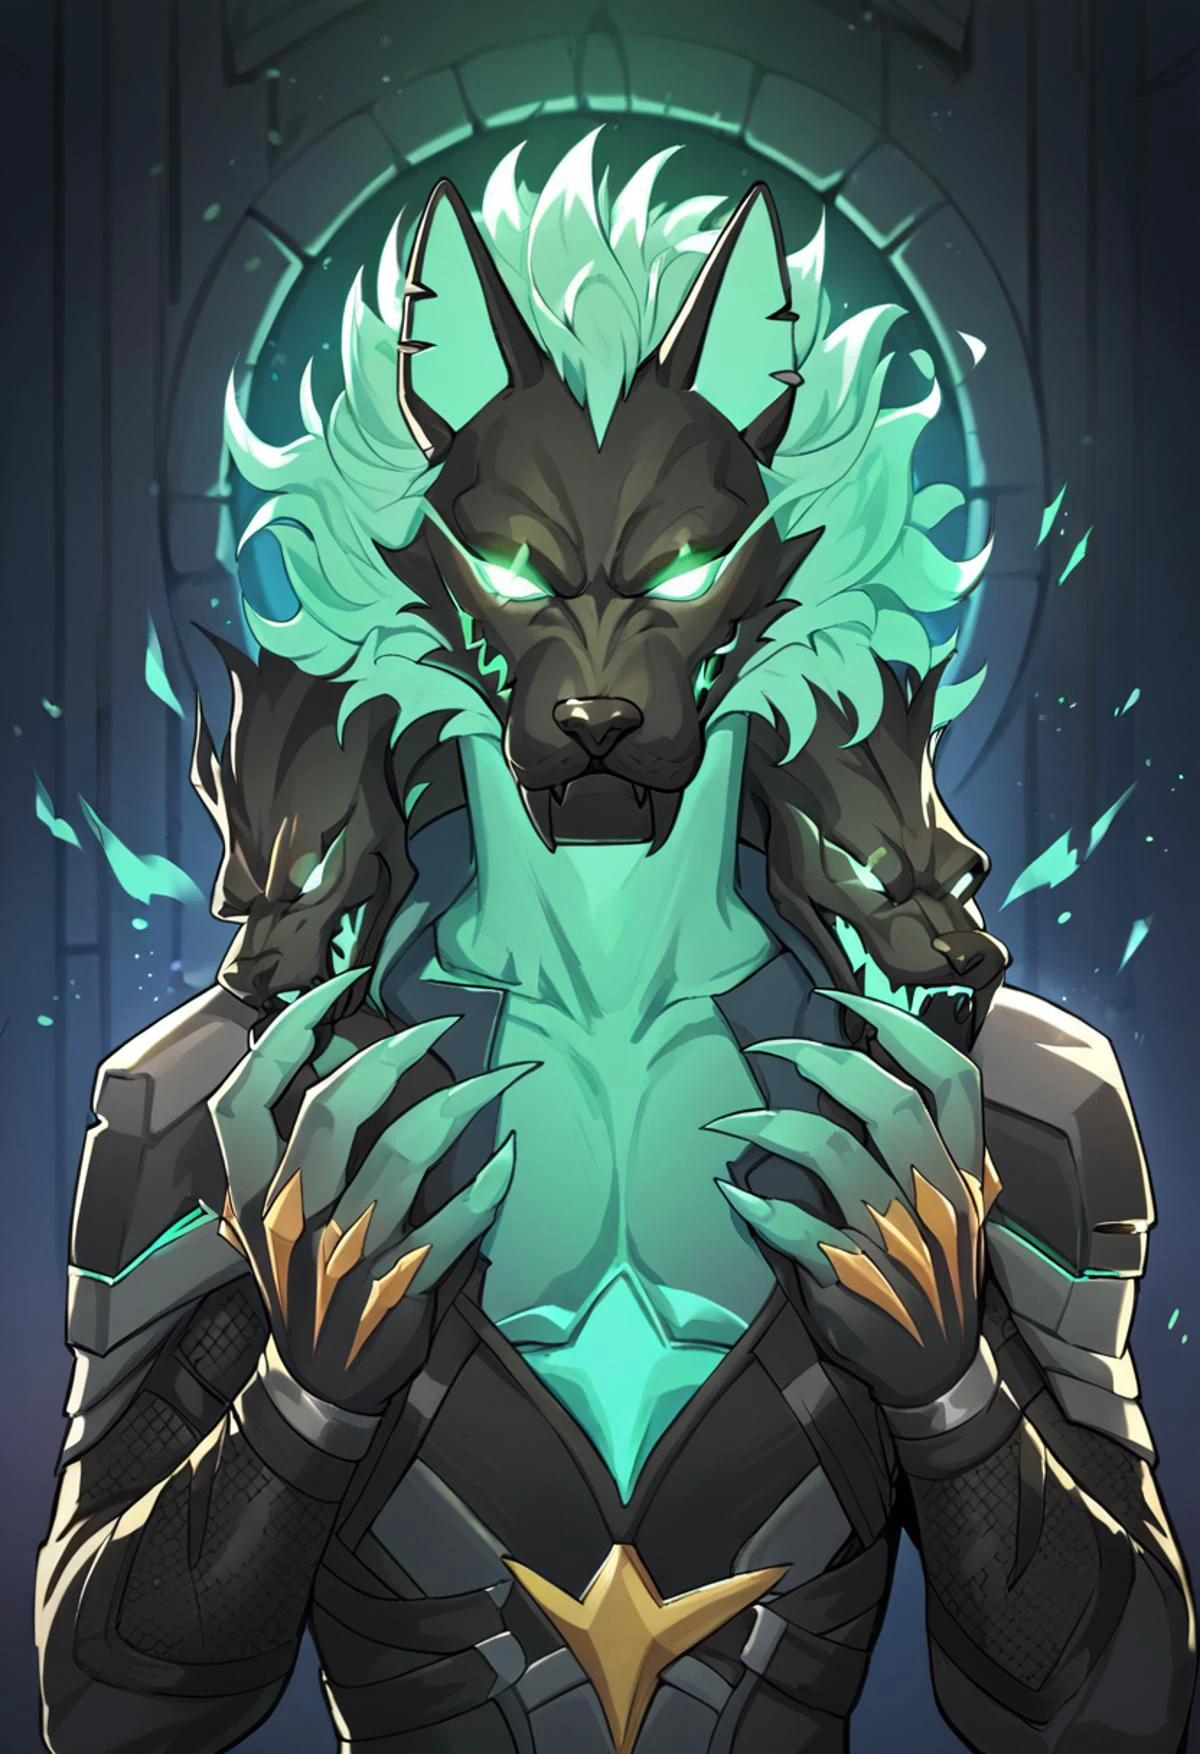 portrait of cerberus (fortnite), rating_safe, Green body, Green Eyes,Glowing Eyes,Claws,tail,snake tail,
 dark interior, particles, castle scene,  cel shading, linear hatching,, score_9, score_8_up, score_7_up, score_6_up, score_5_up, score_4_up